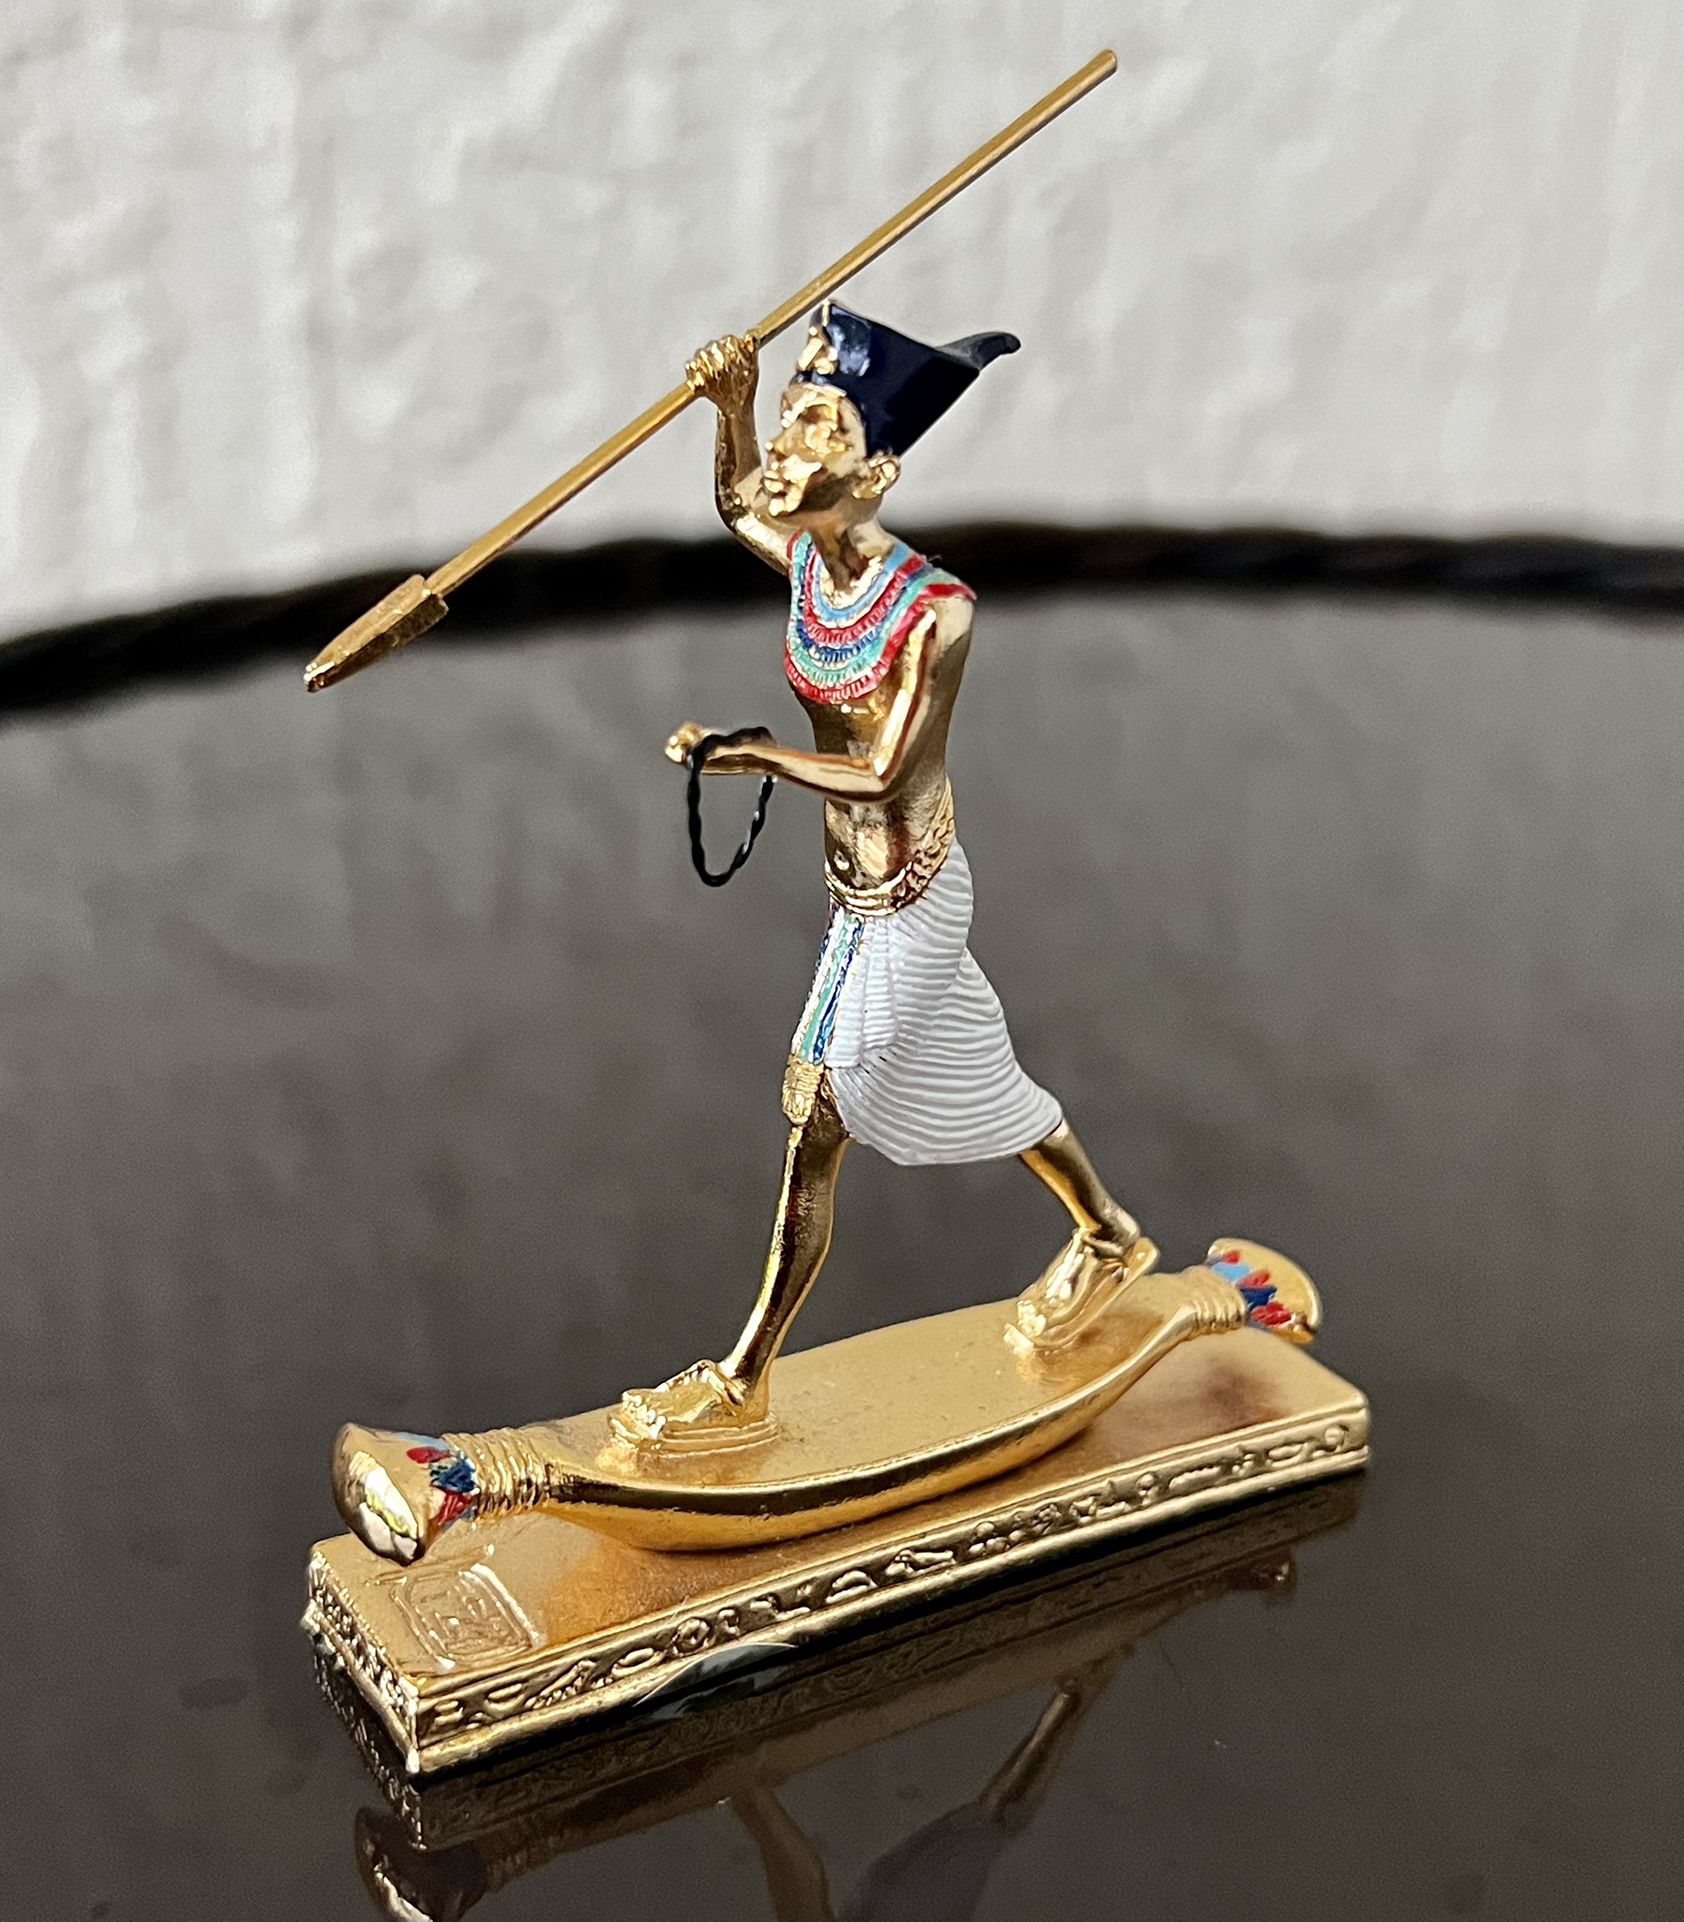 metal egyptian summit collection figurine Gold King Tut on Reed Boat Holding Spear - Egyptian Museum Piece Gold King Tut Statue  on Reed Boat Hunting 